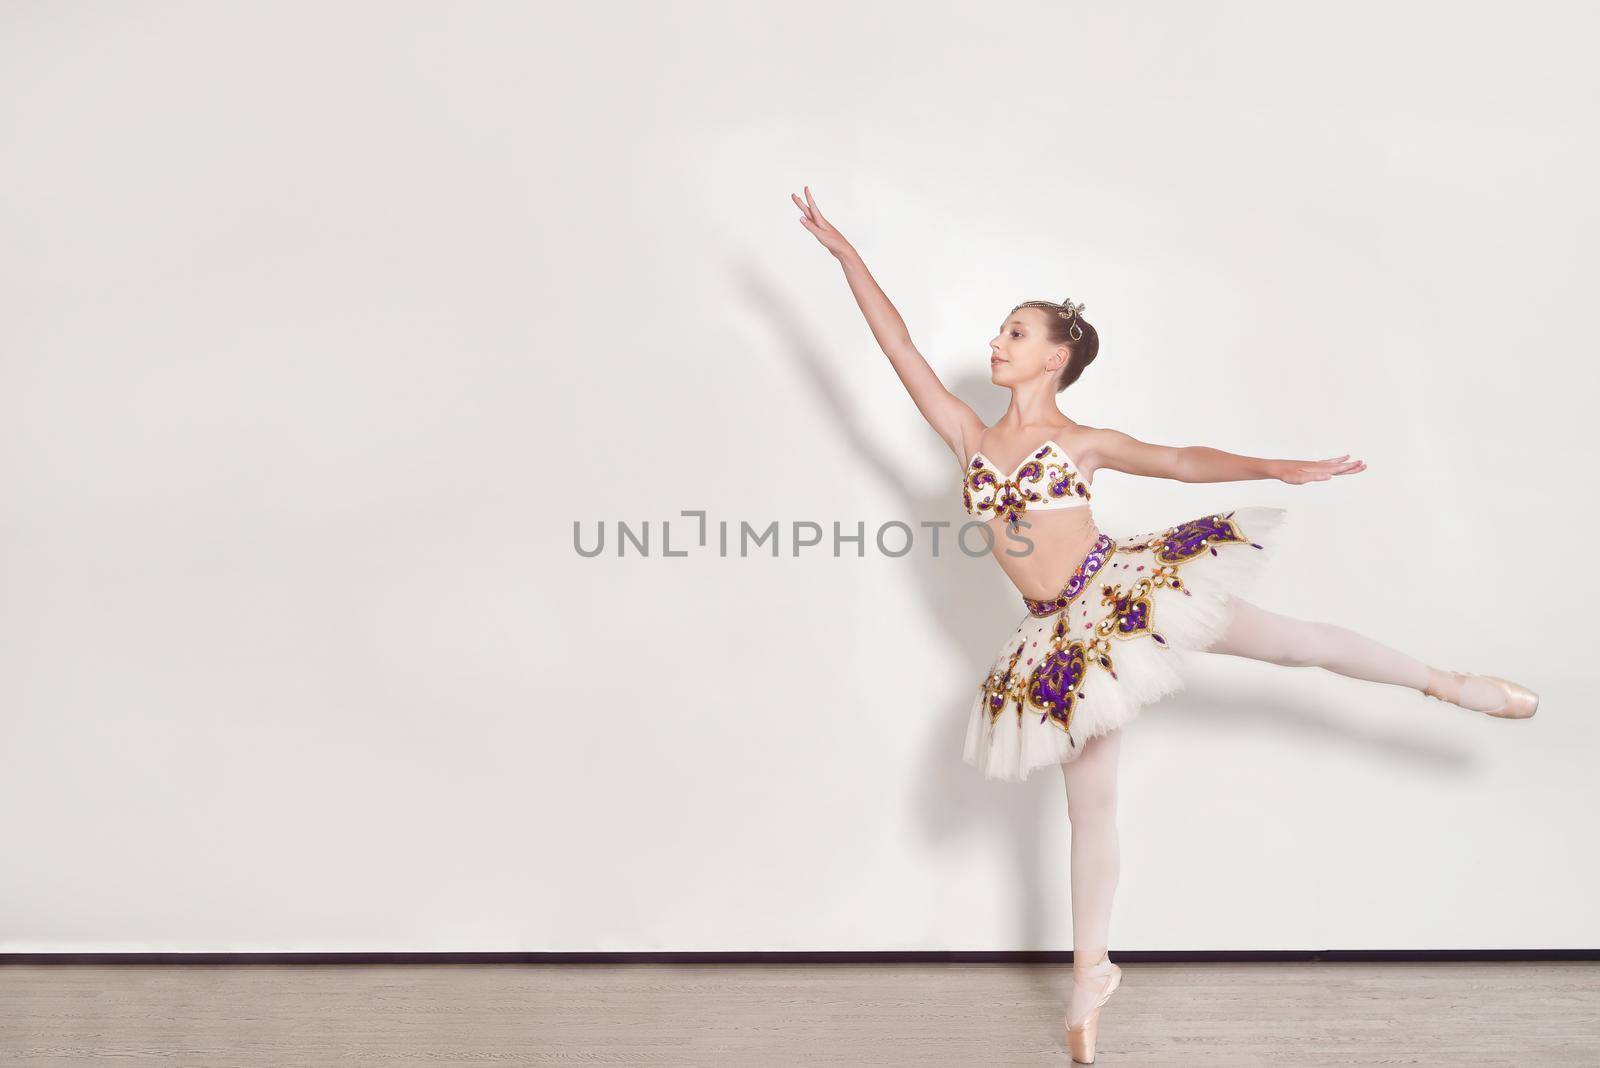 A young ballerina performs ballet exercises in the studio against a white background